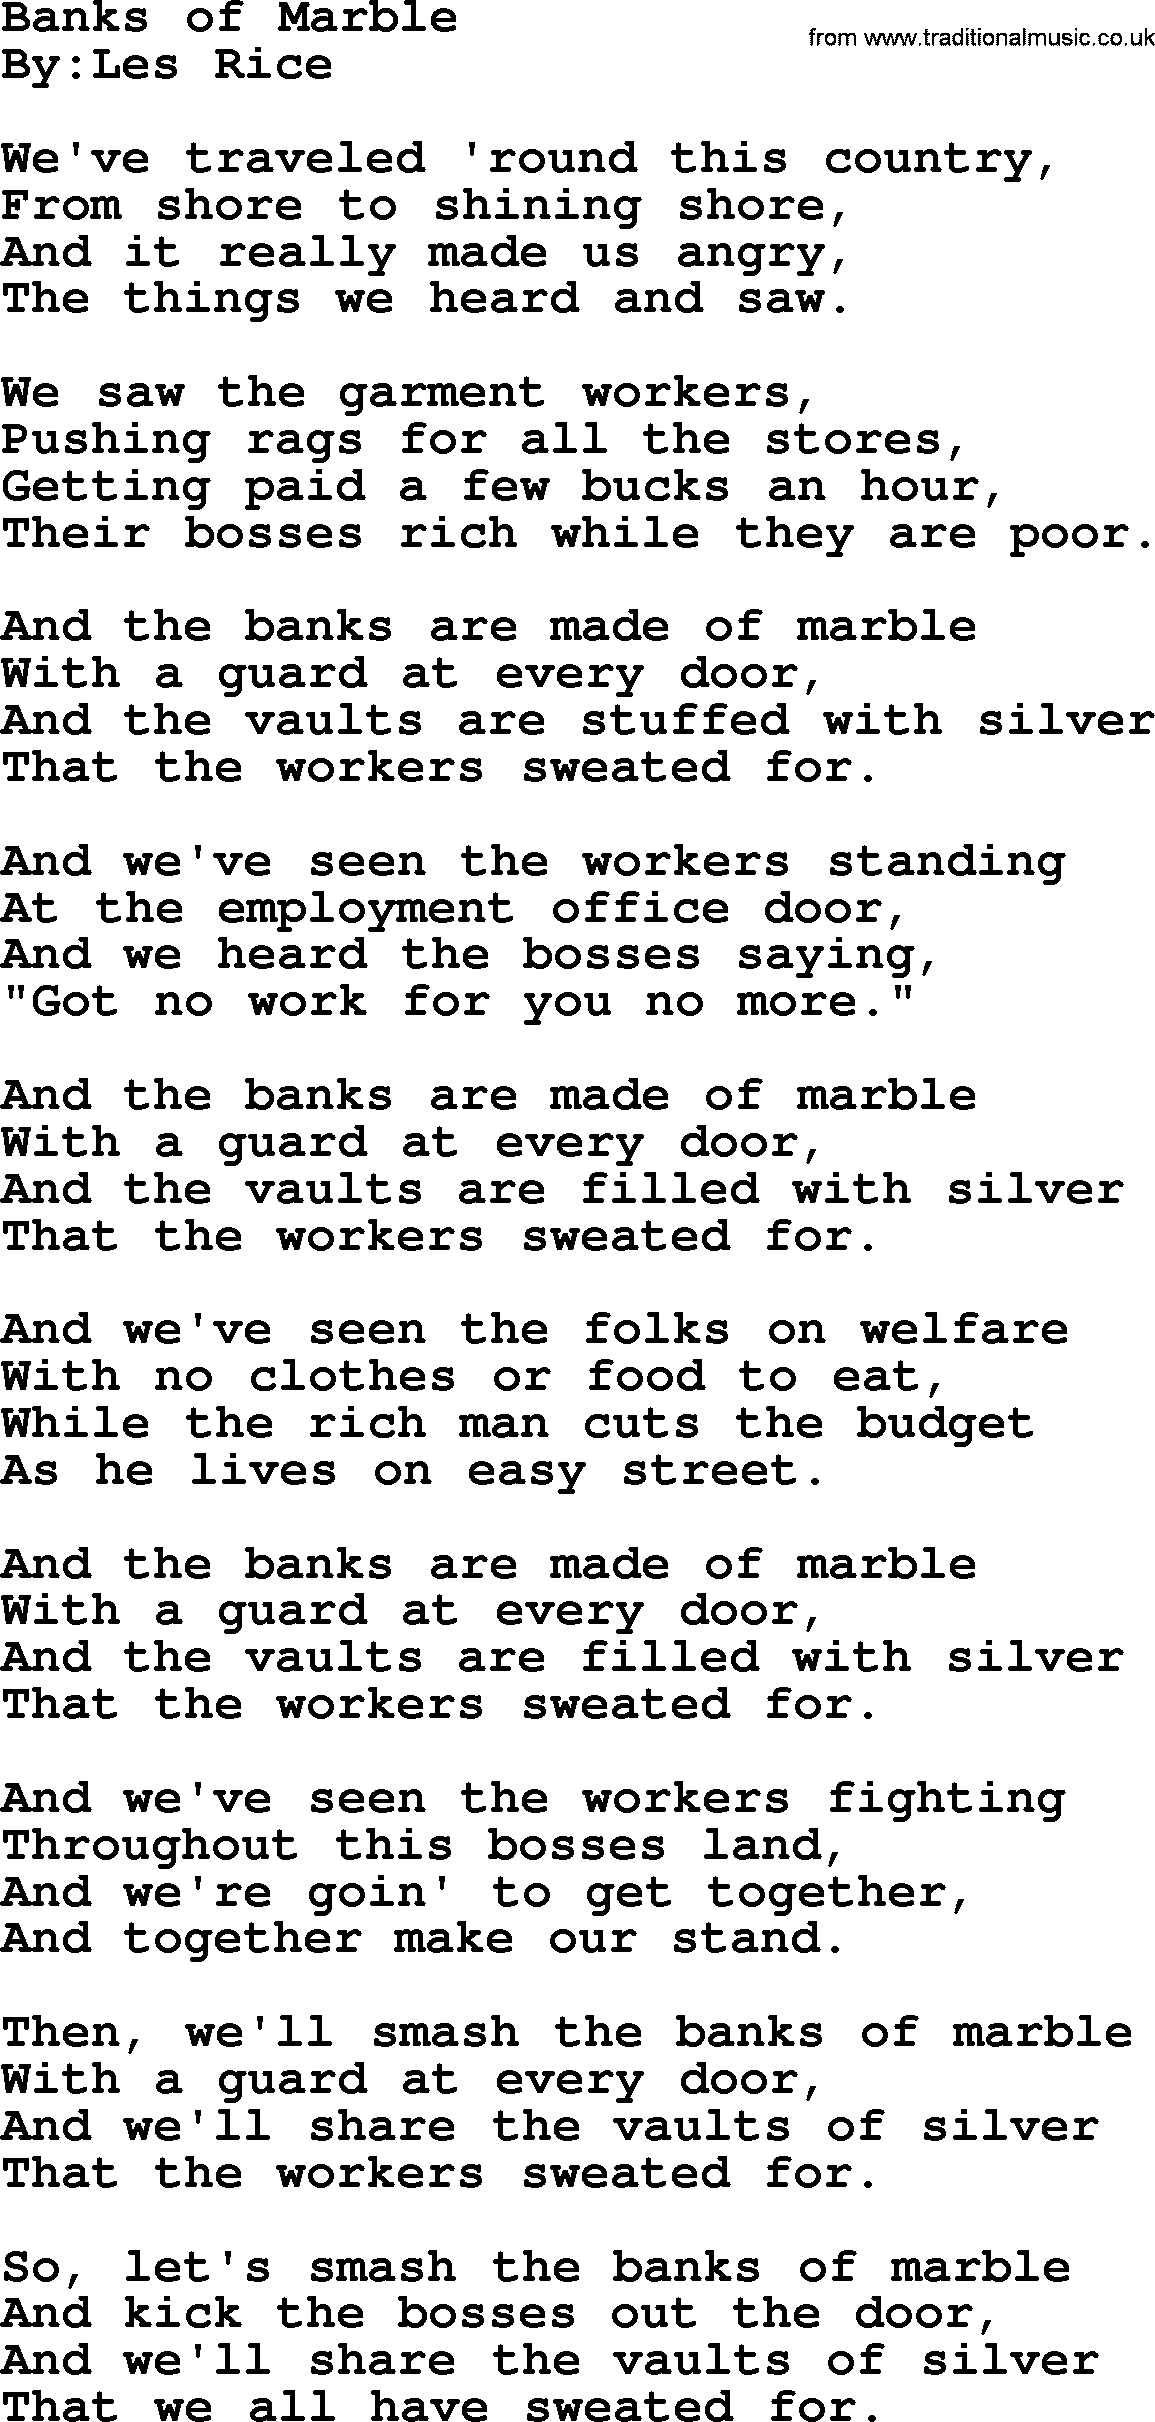 Political, Solidarity, Workers or Union song: Banks Of Marble, lyrics